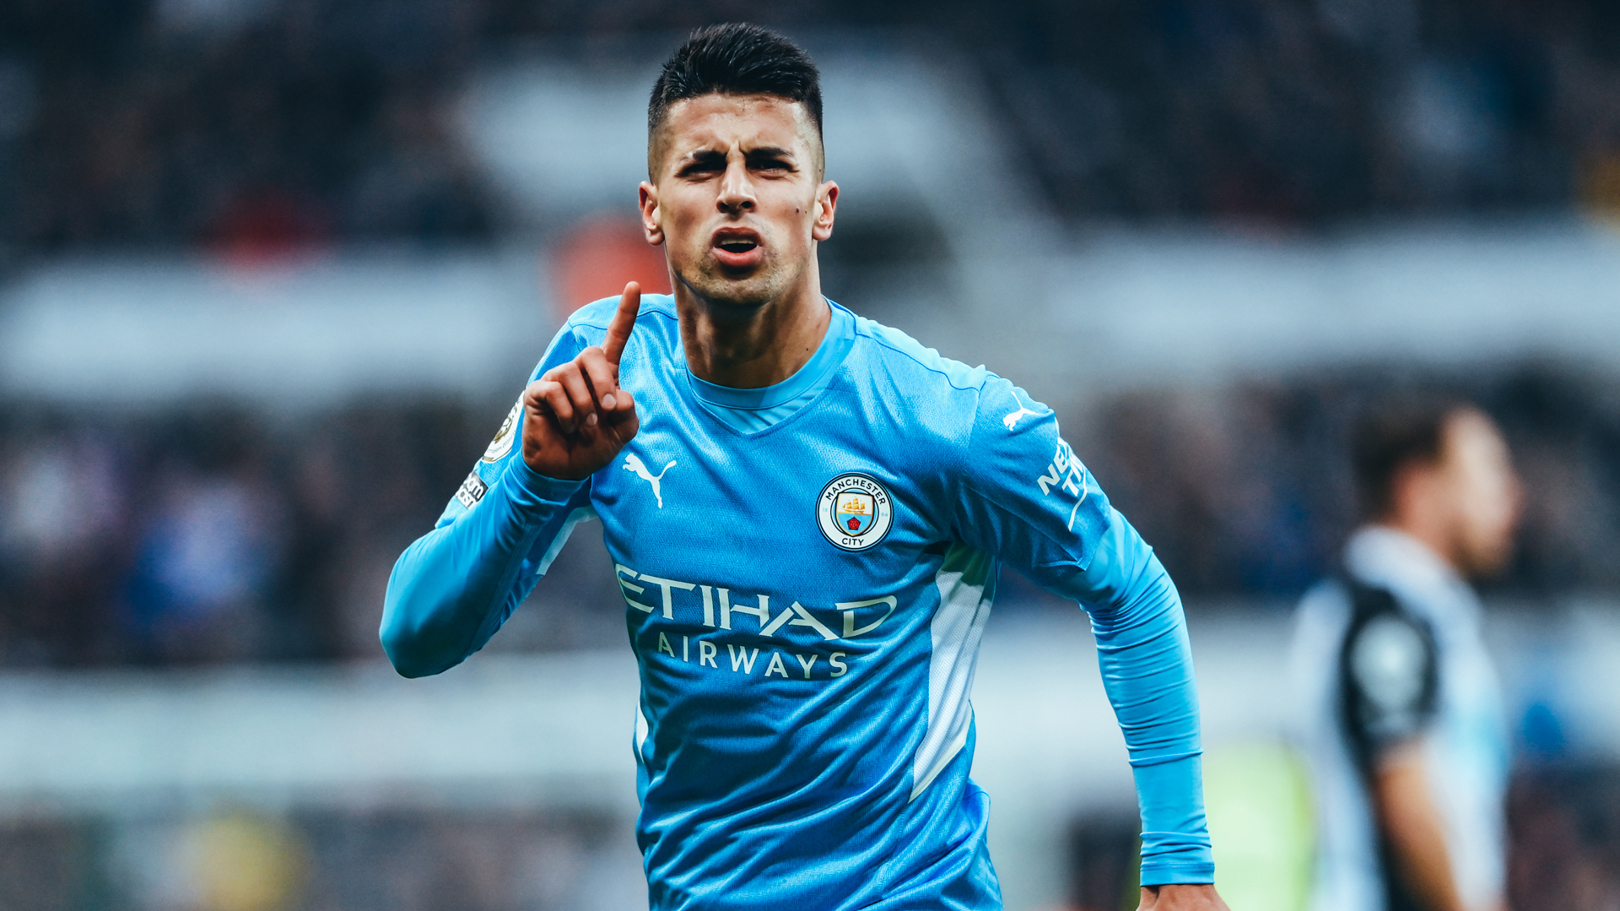 Cancelo: City in good shape ahead of Leicester clash